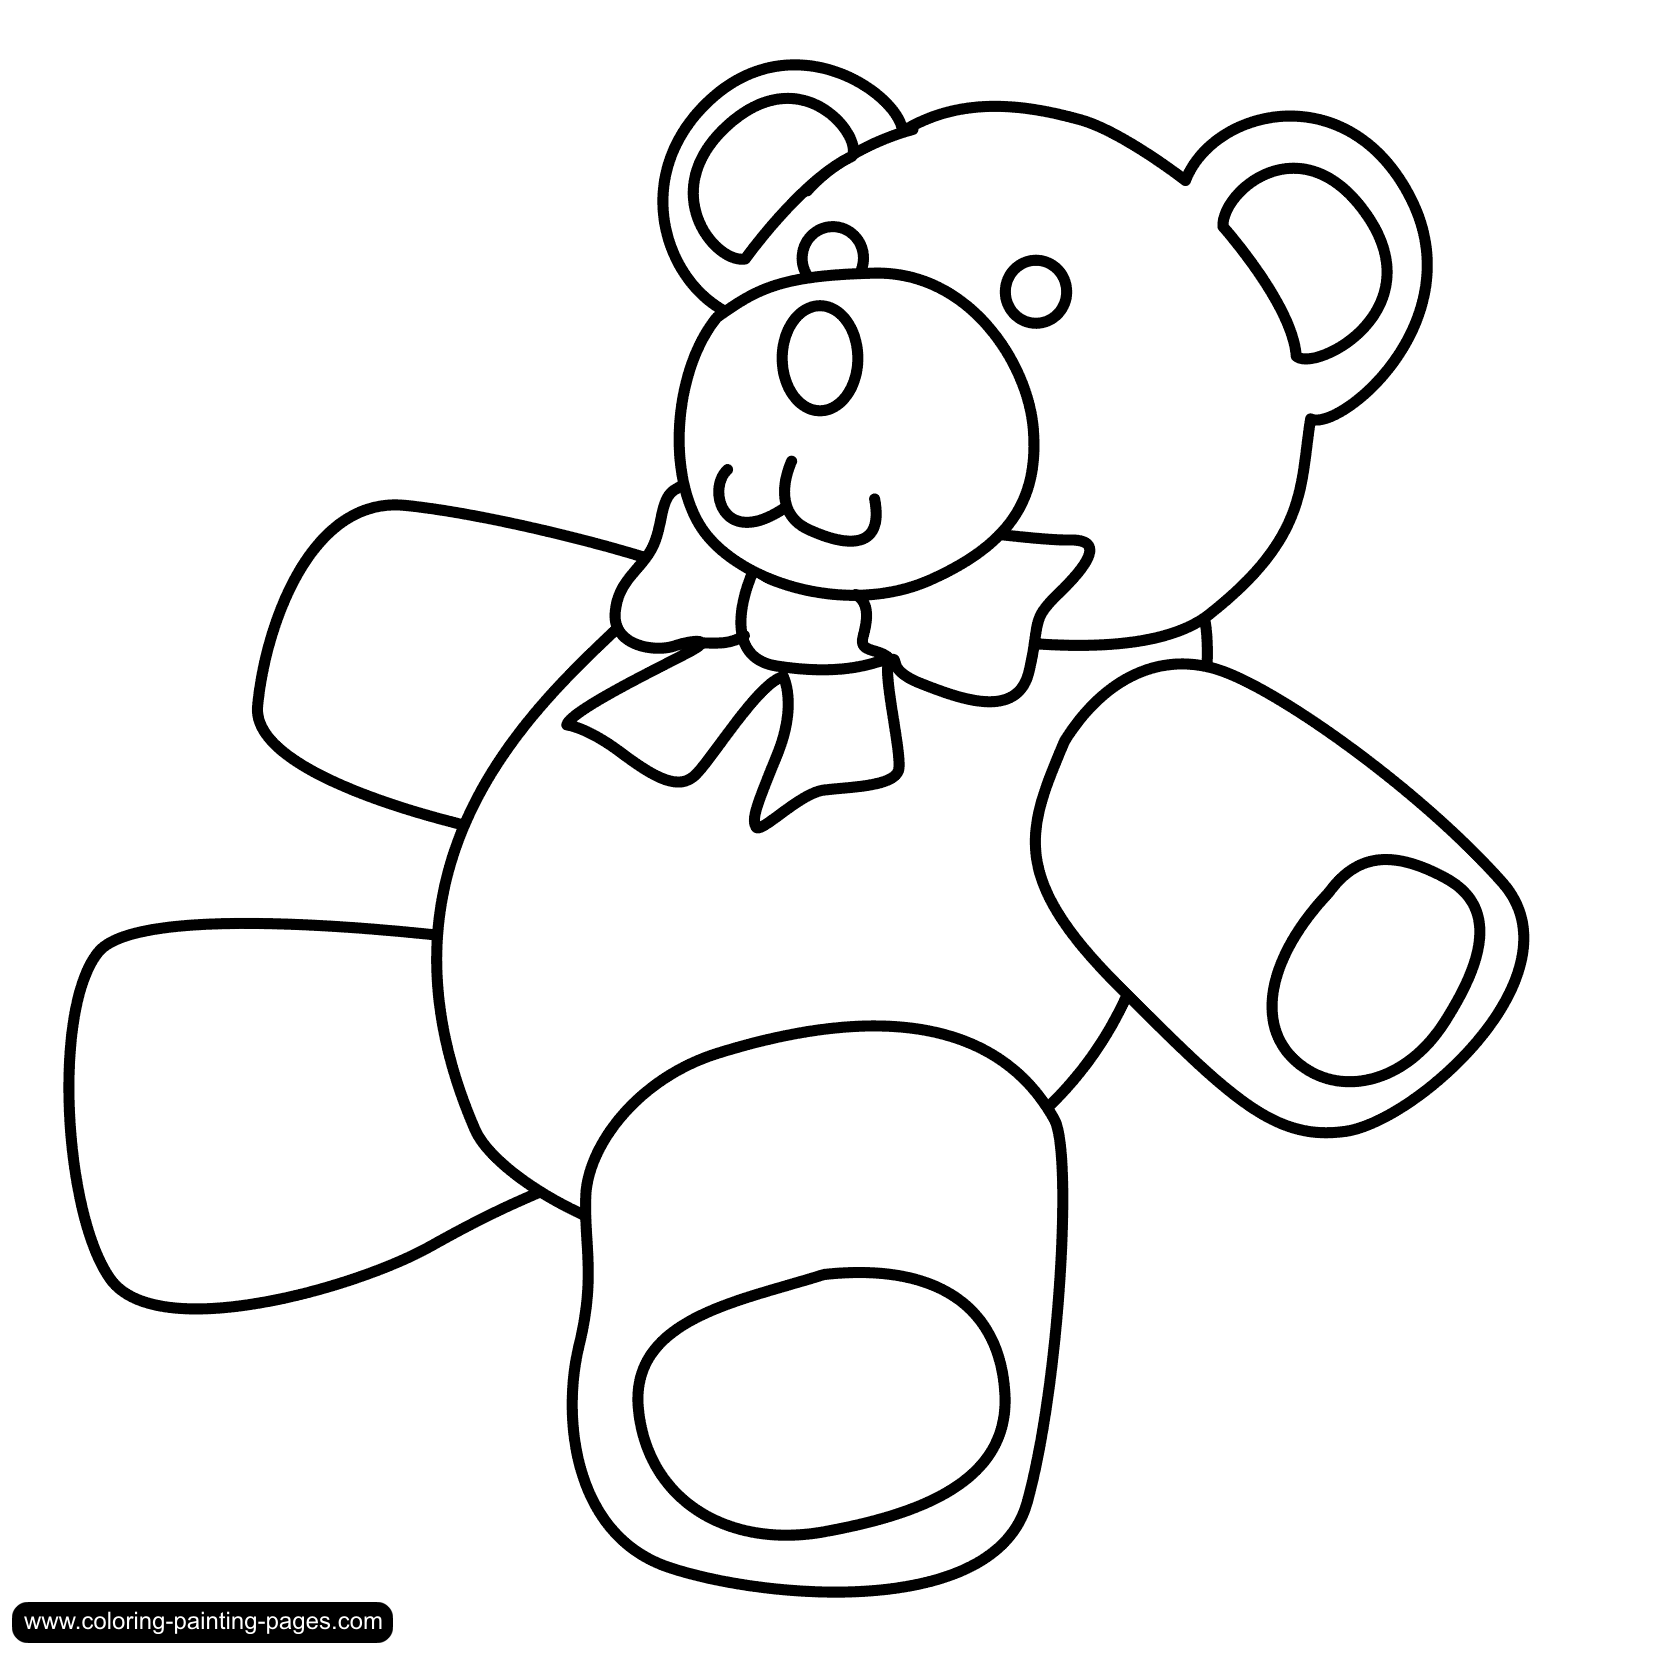 Teddy bear black and white free teddy bear clipart black and.